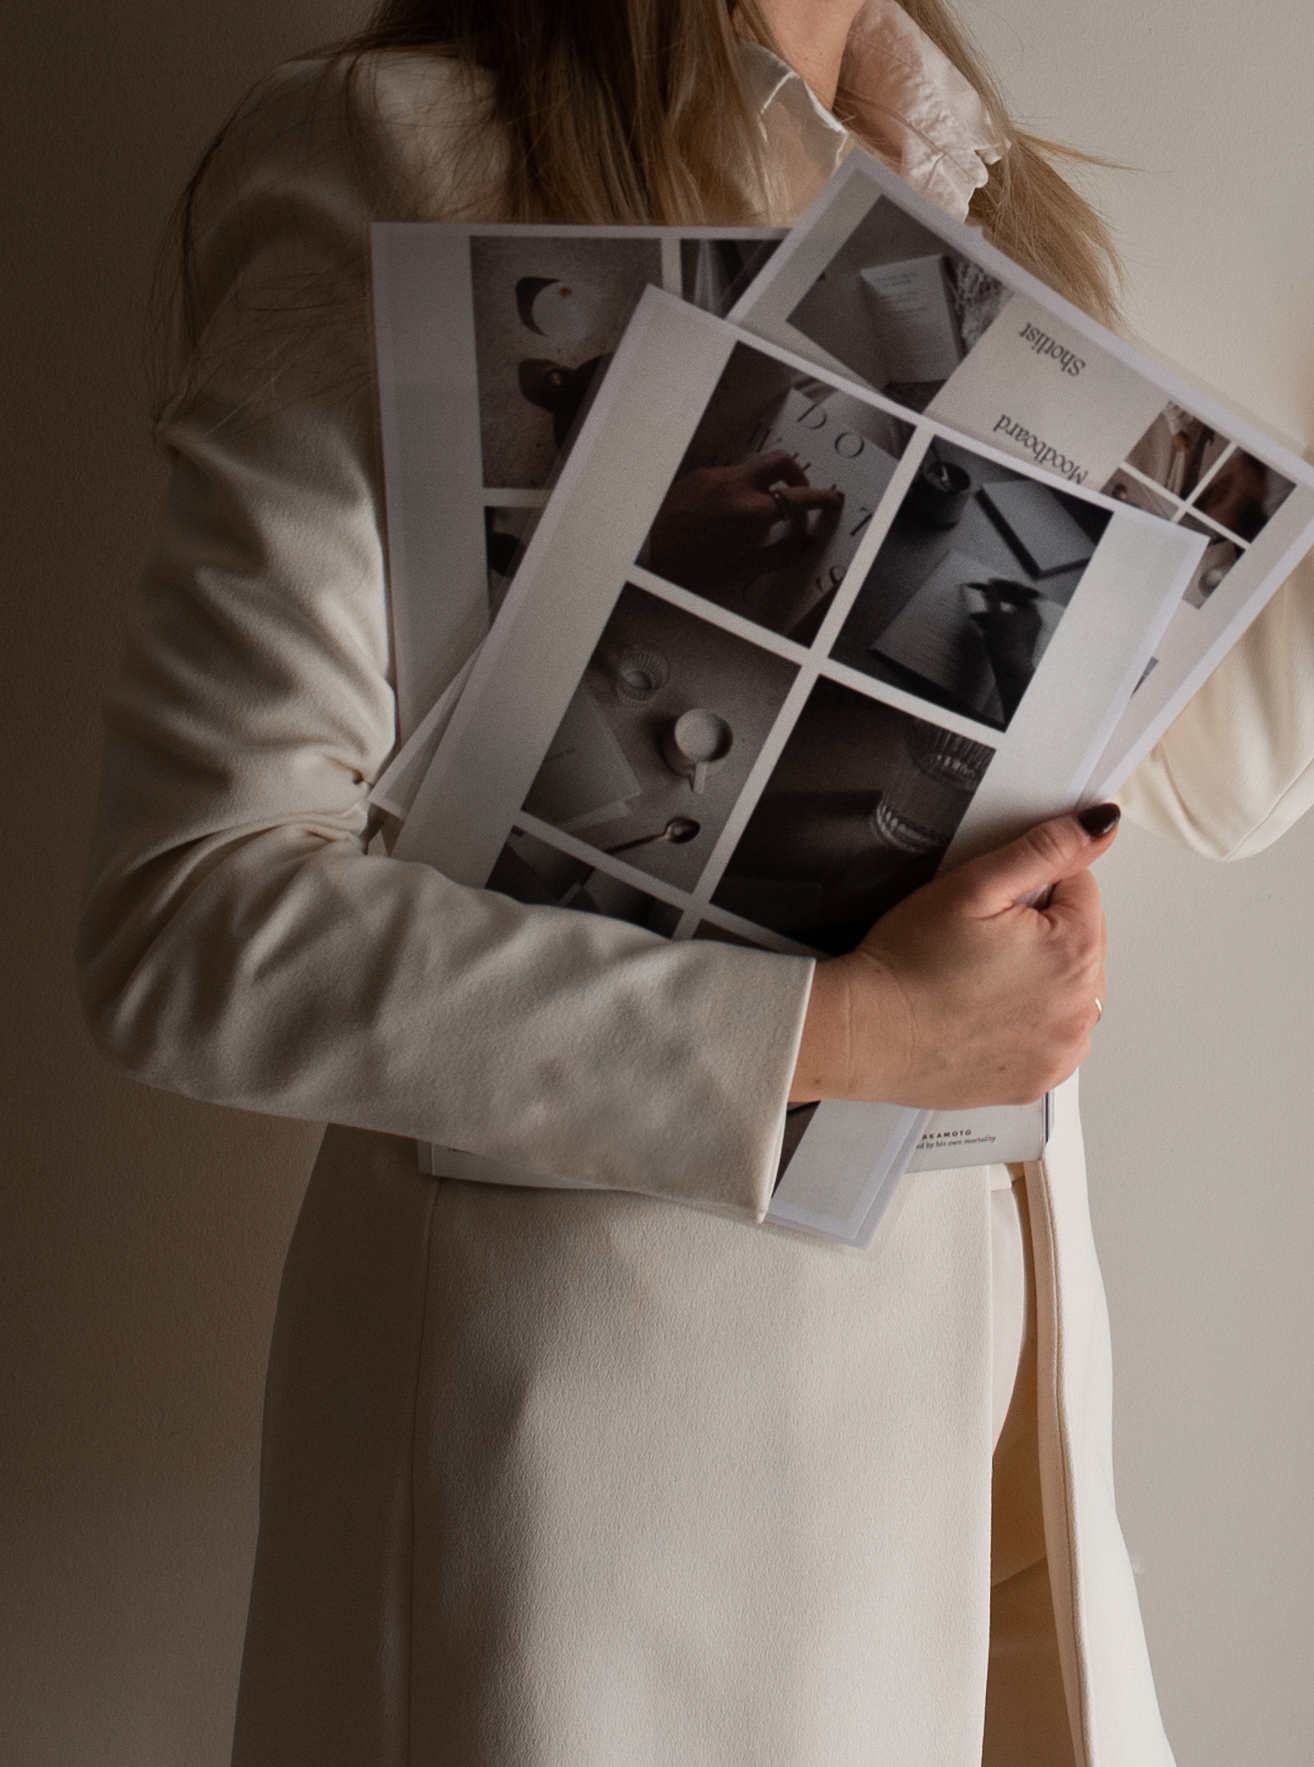 women holding a stack of images